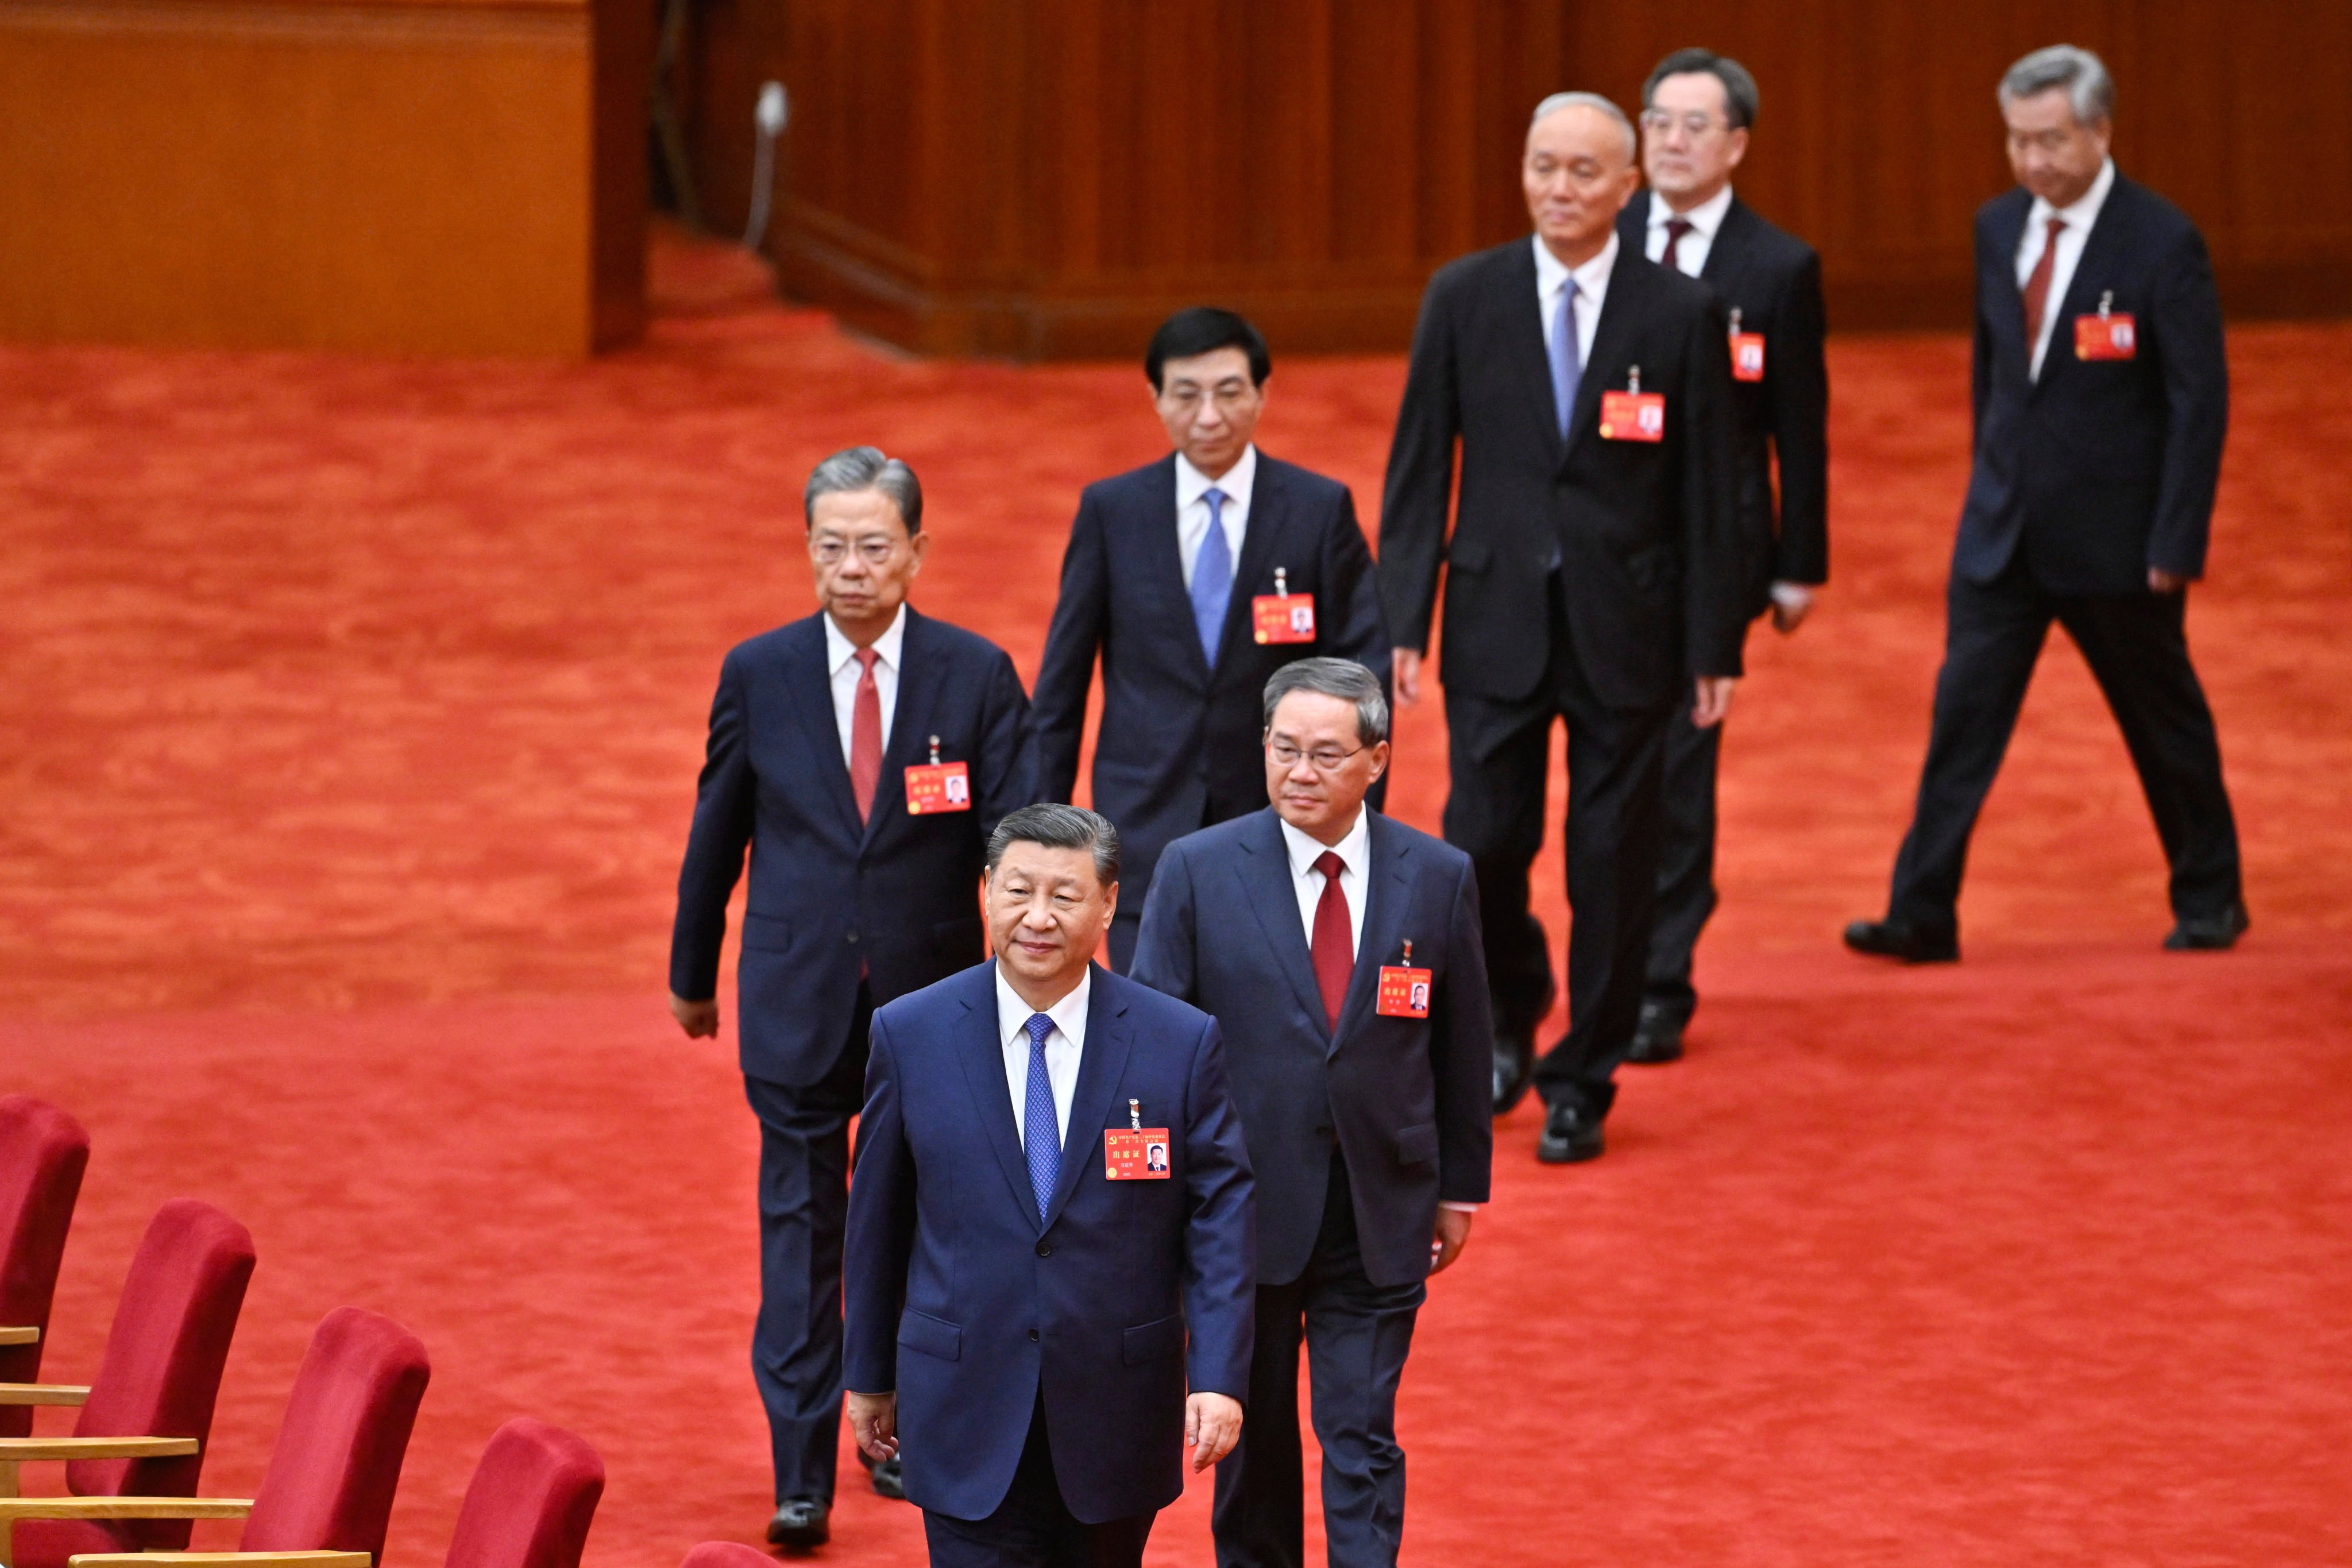 Members of the Politburo Standing Committee (from front) Xi Jinping, Li Qiang, Zhao Leji, Wang Huning, Cai Qi, Ding Xuexiang and Li Xi attend the third plenary session of the 20th Communist Party of China Central Committee in Beijing. Photo: AP